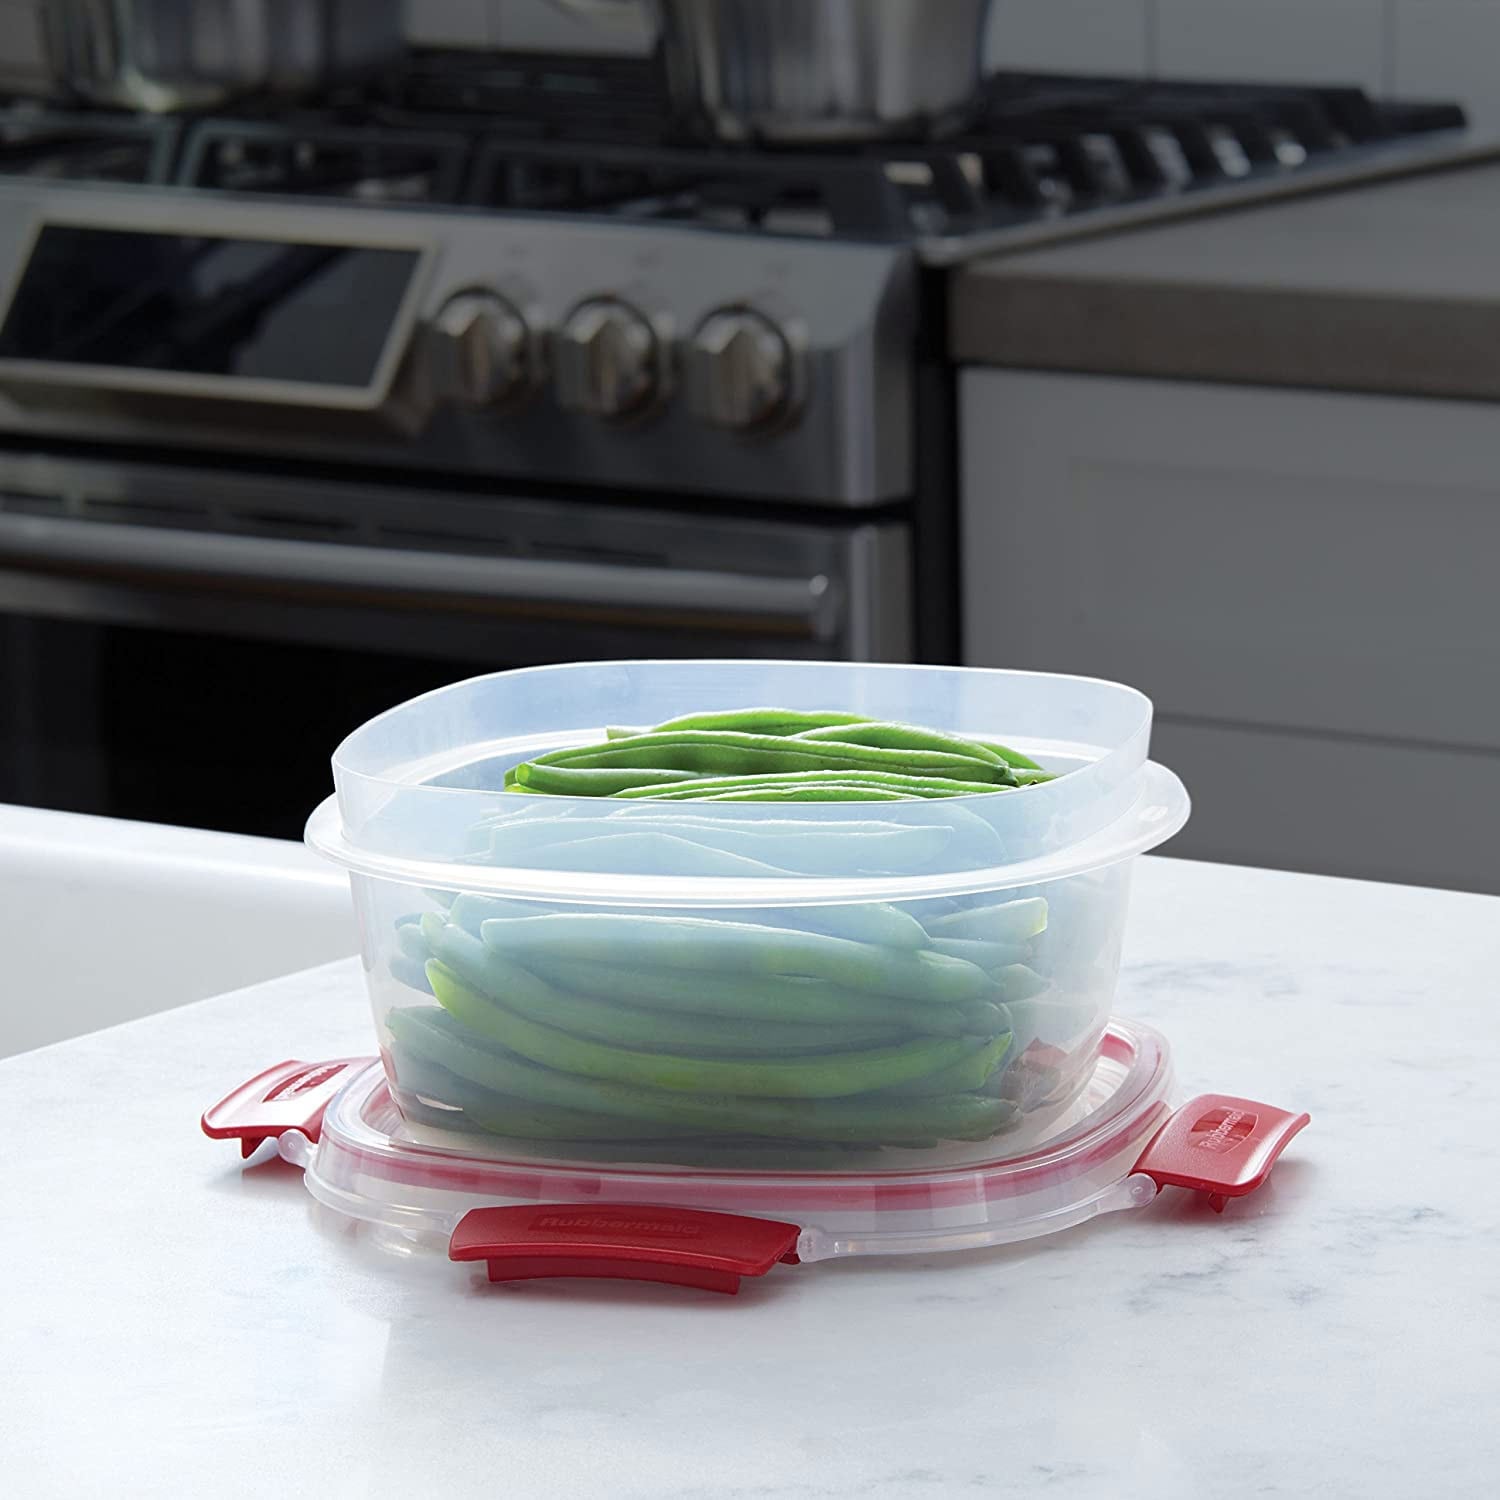 https://ak1.ostkcdn.com/images/products/is/images/direct/3c07d2dde8289b538902b3320dc211bb23db39c9/Rubbermaid-Easy-Find-Lids-Tabs-Food-Storage-Container%2C-16-Piece-Set%2C-Clear-with-Red-Tabs.jpg